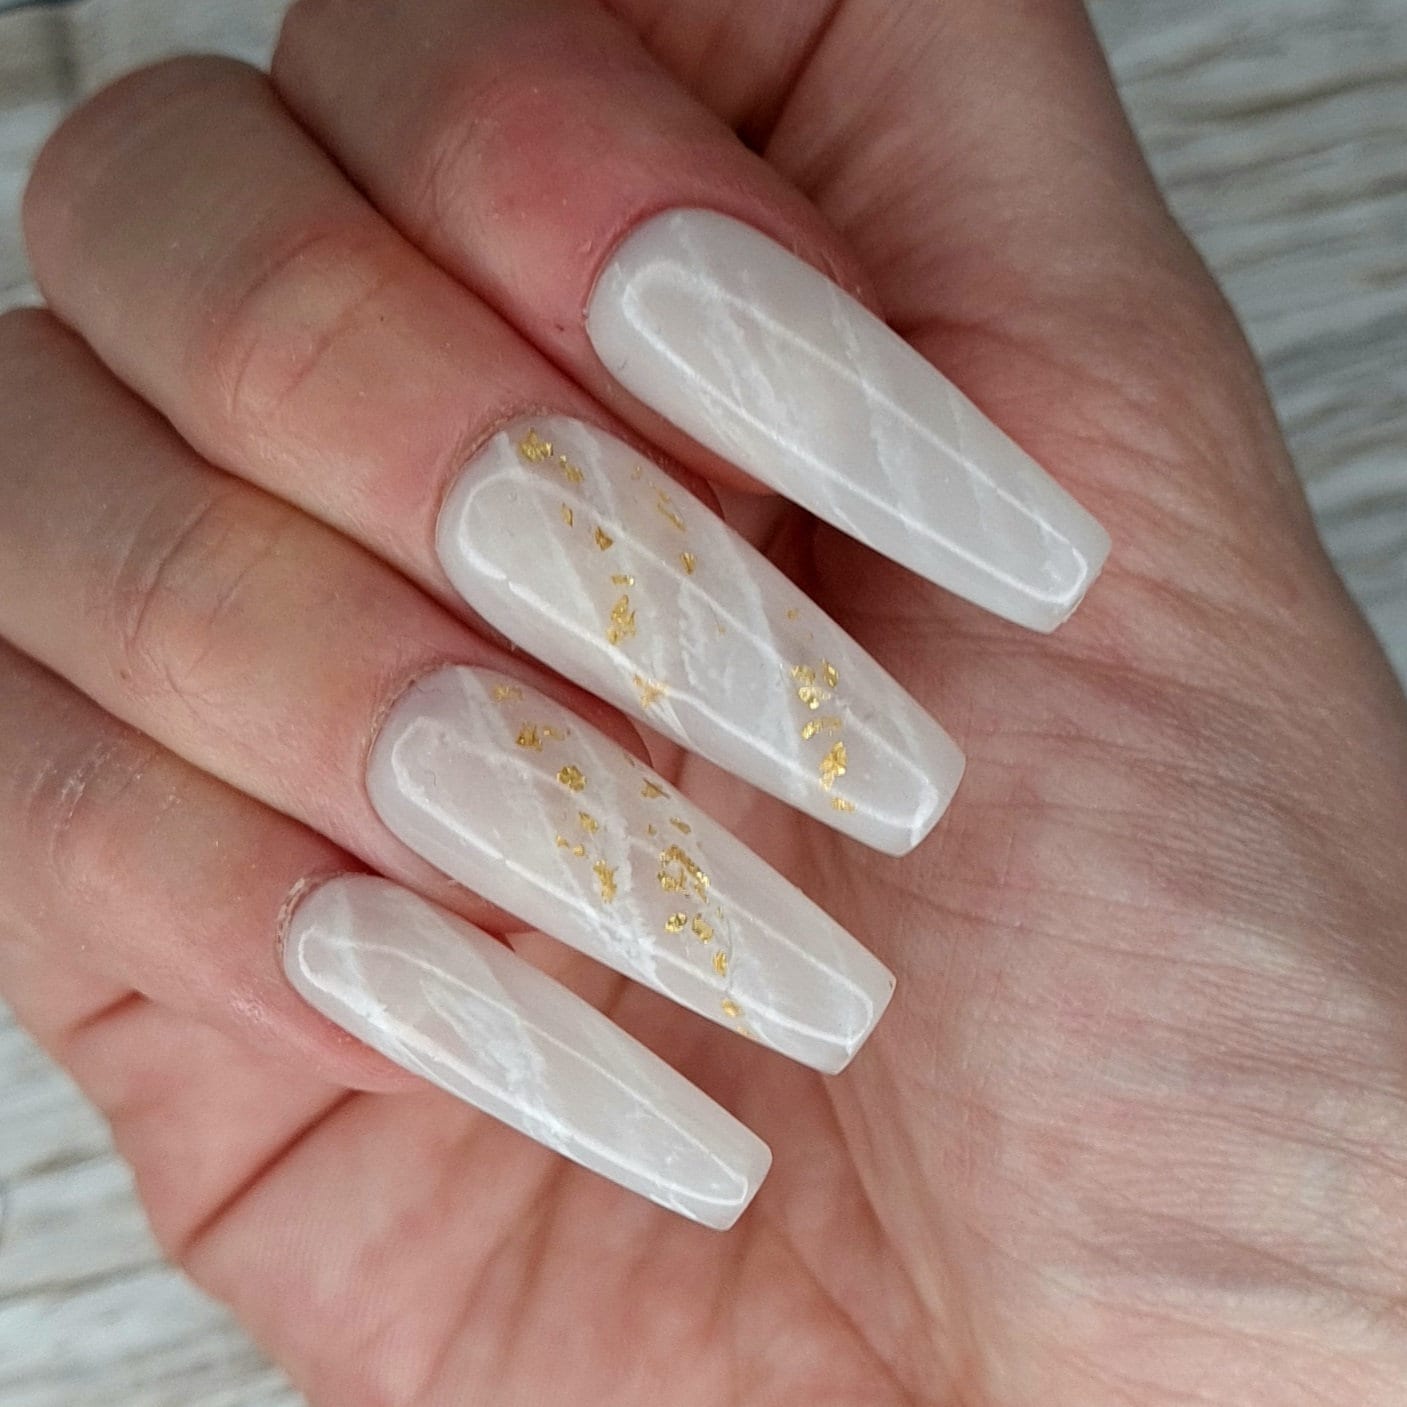 ROSALINE Luxury GEL X Reusable Press on Nails Medium Almond Round Pearl  Accent French Tips Nails White French Custom Gel Nail Set -  Sweden